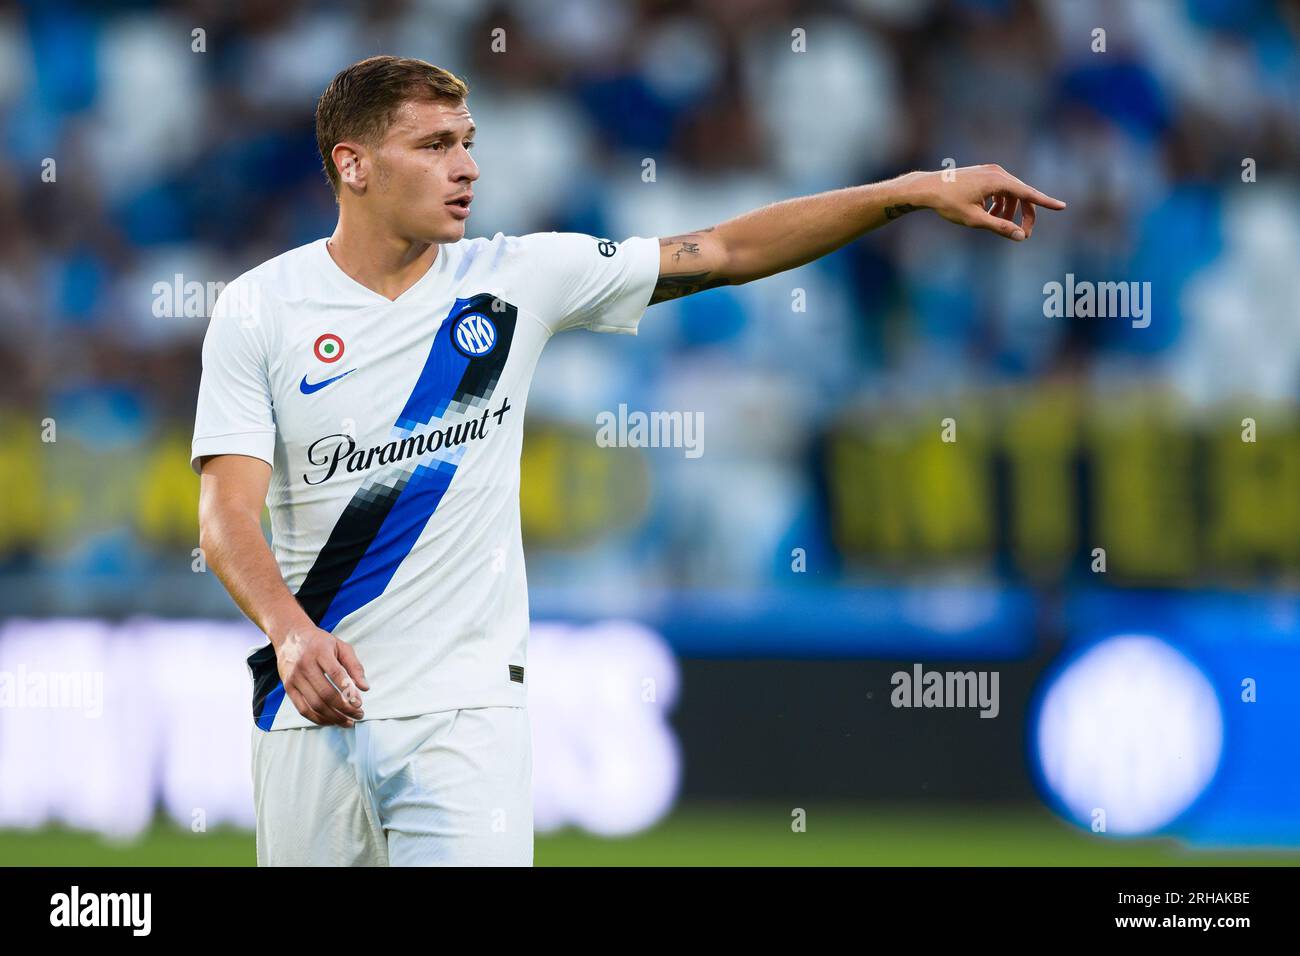 Nicolo Barella of FC Internazionale gestures during the friendly football match between FC Internazionale and KF Egnatia. Stock Photo